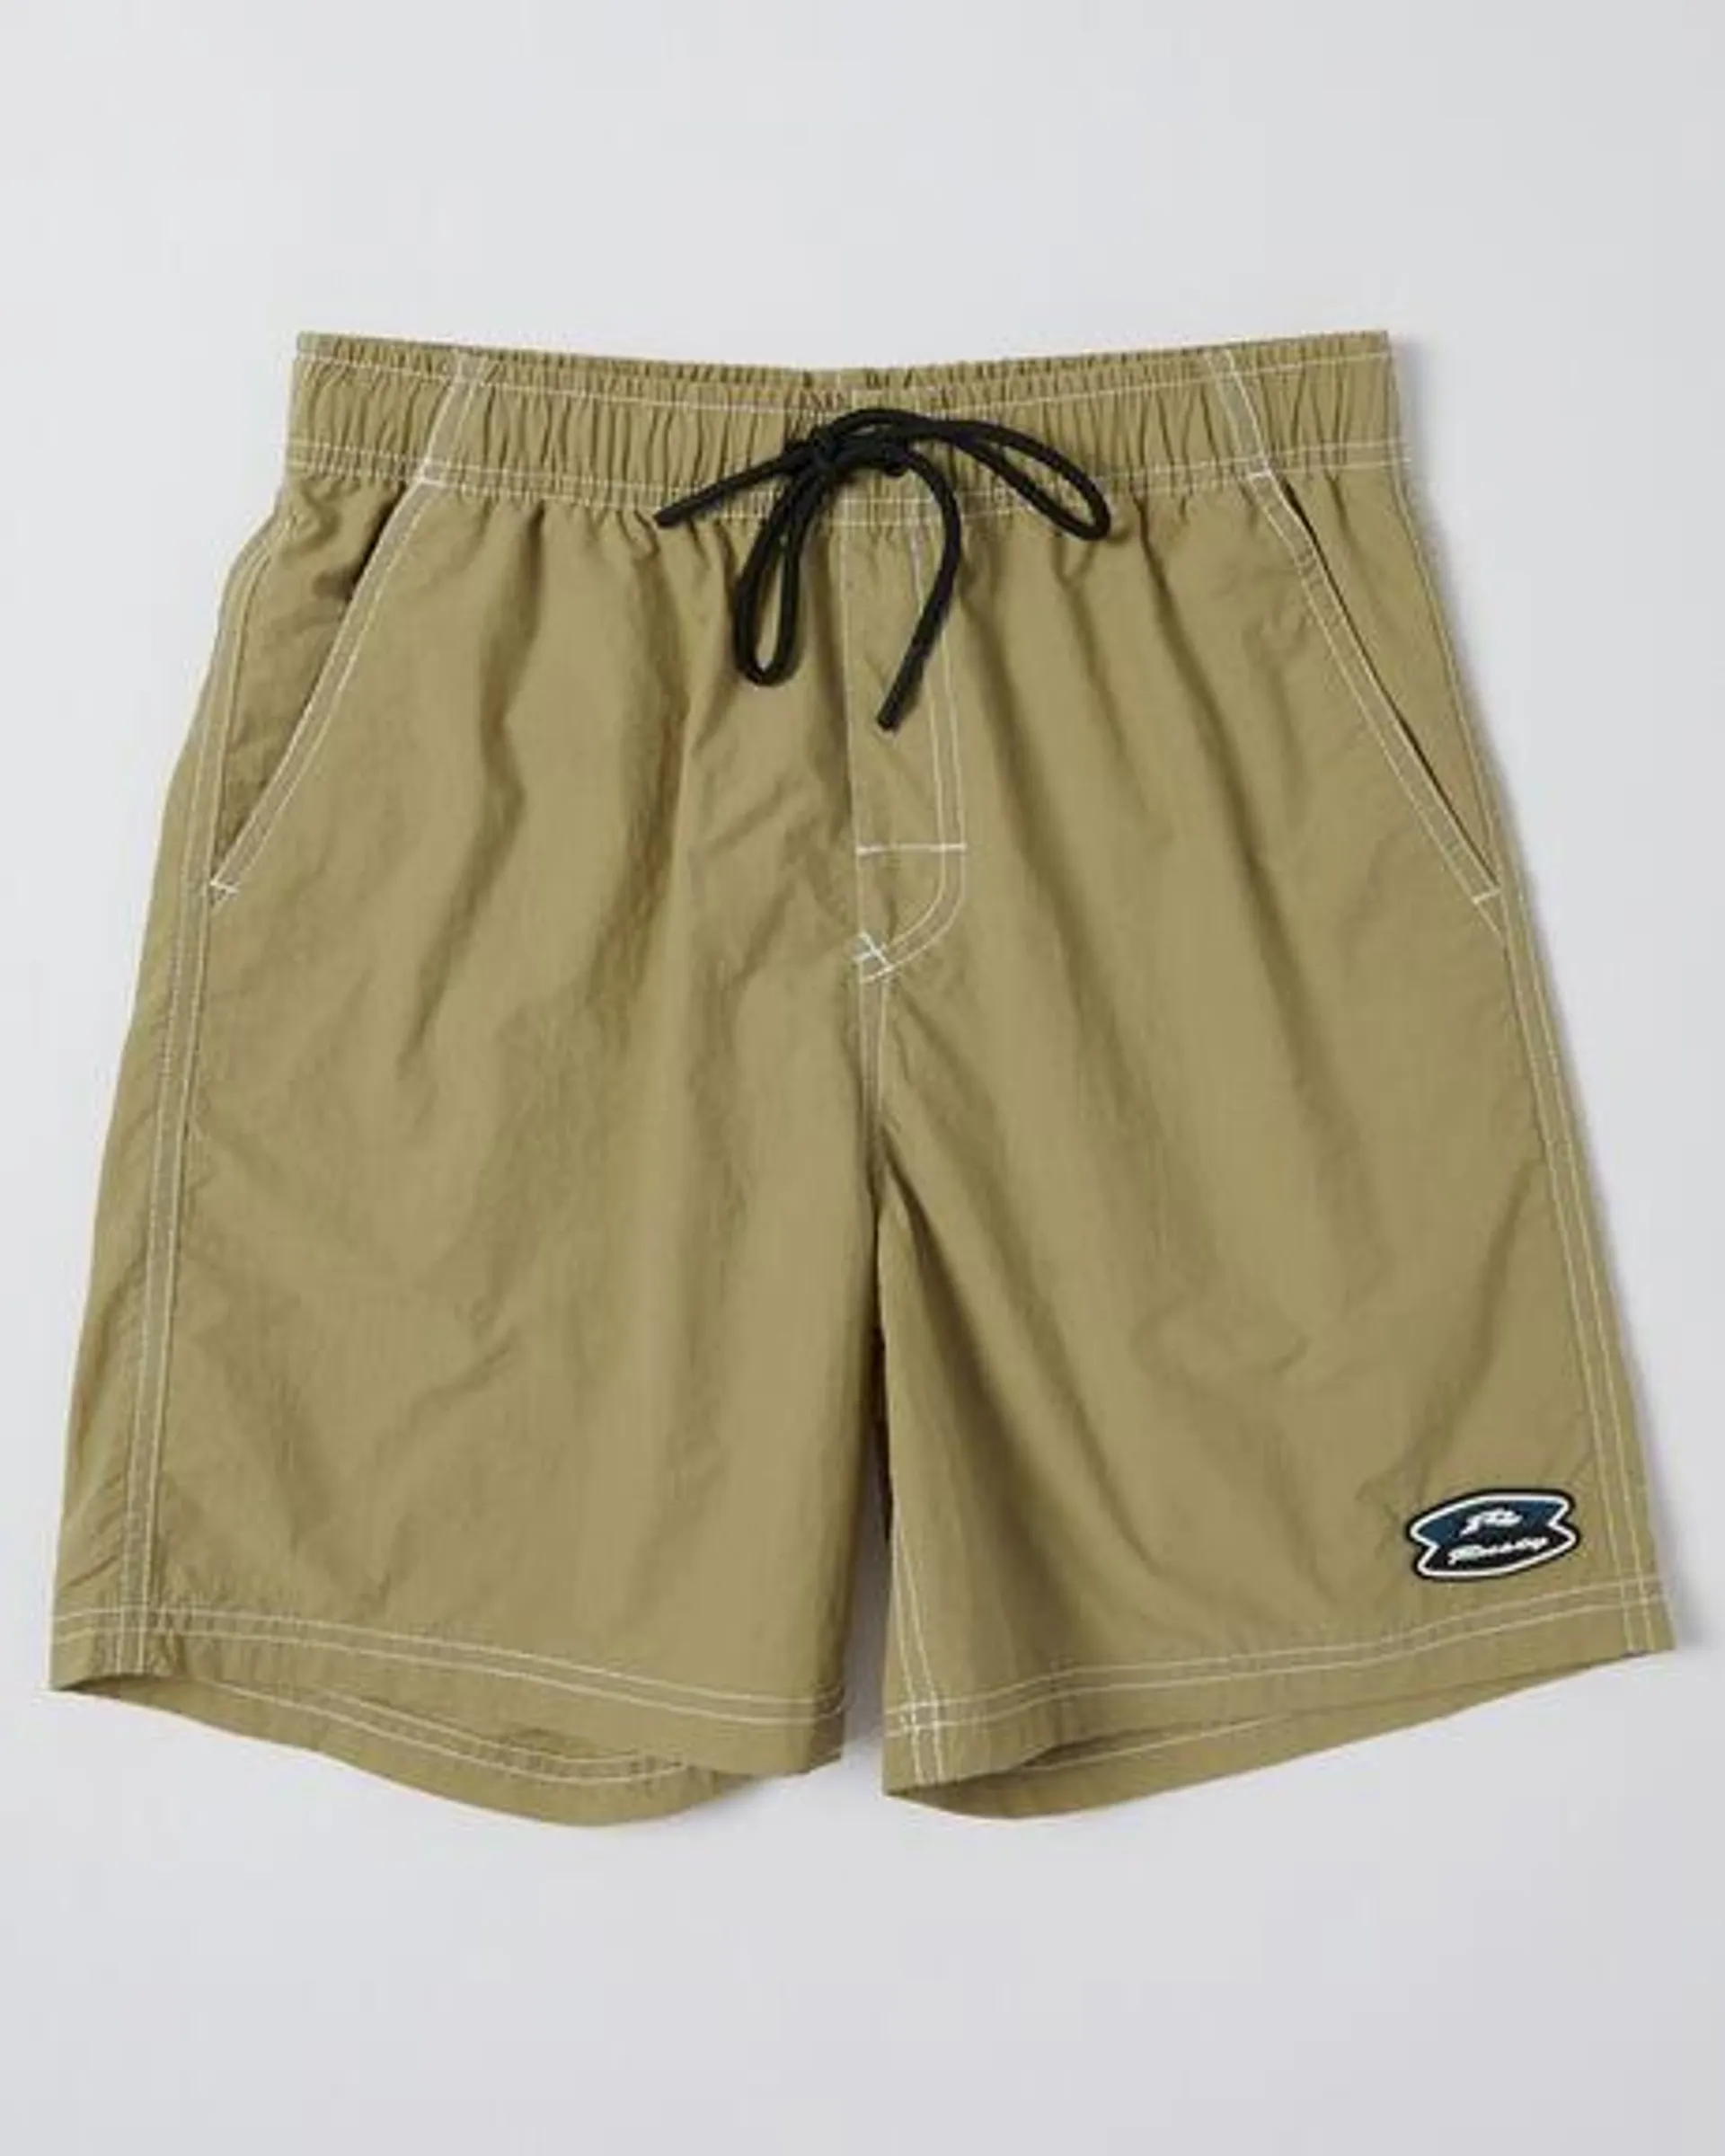 Heritage 95 All Day Short - Teens